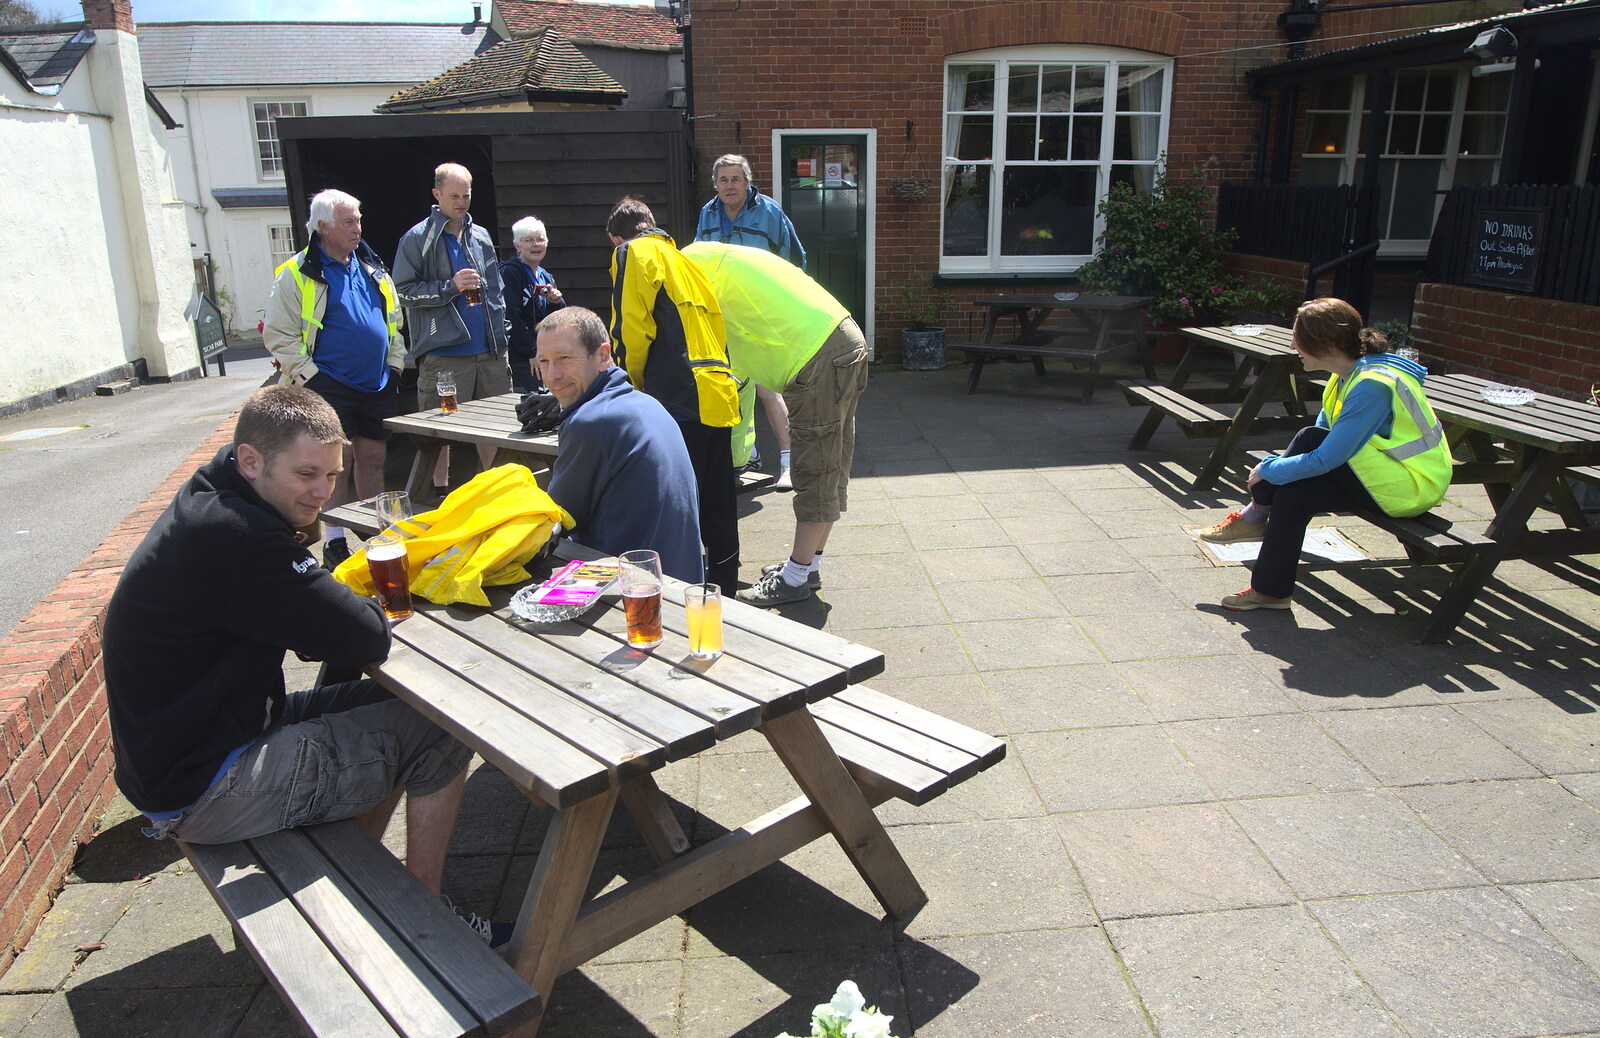 The BSCC at Great Bardfield from The BSCC Cycling Weekend, The Swan Inn, Thaxted, Essex - 12th May 2012